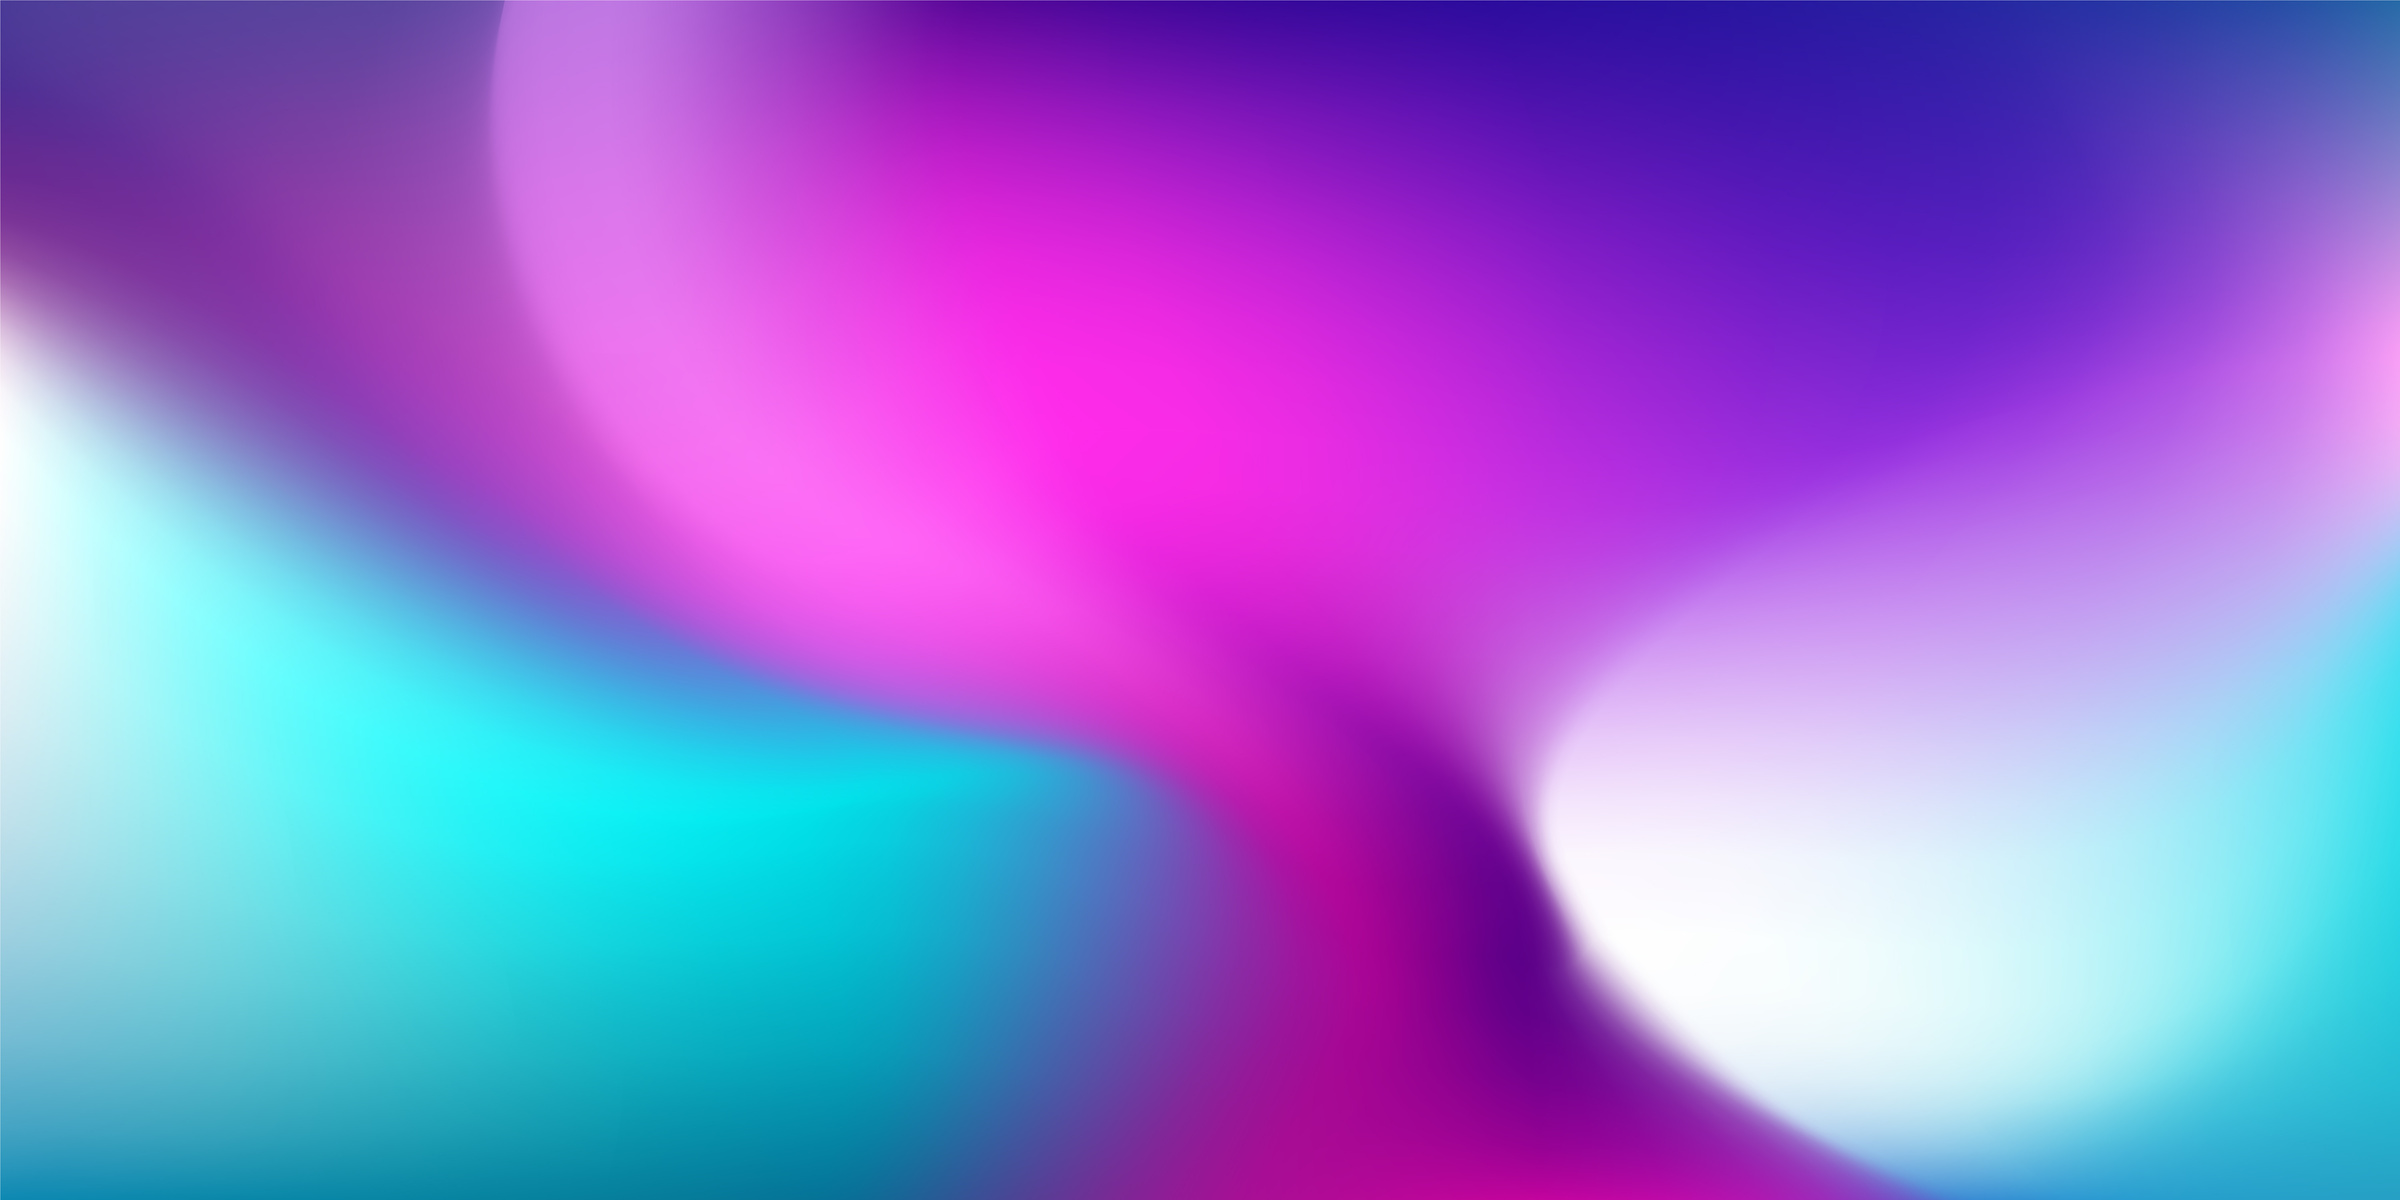 Gradient Purple Teal background. Bright Colorful Blurred backdrop